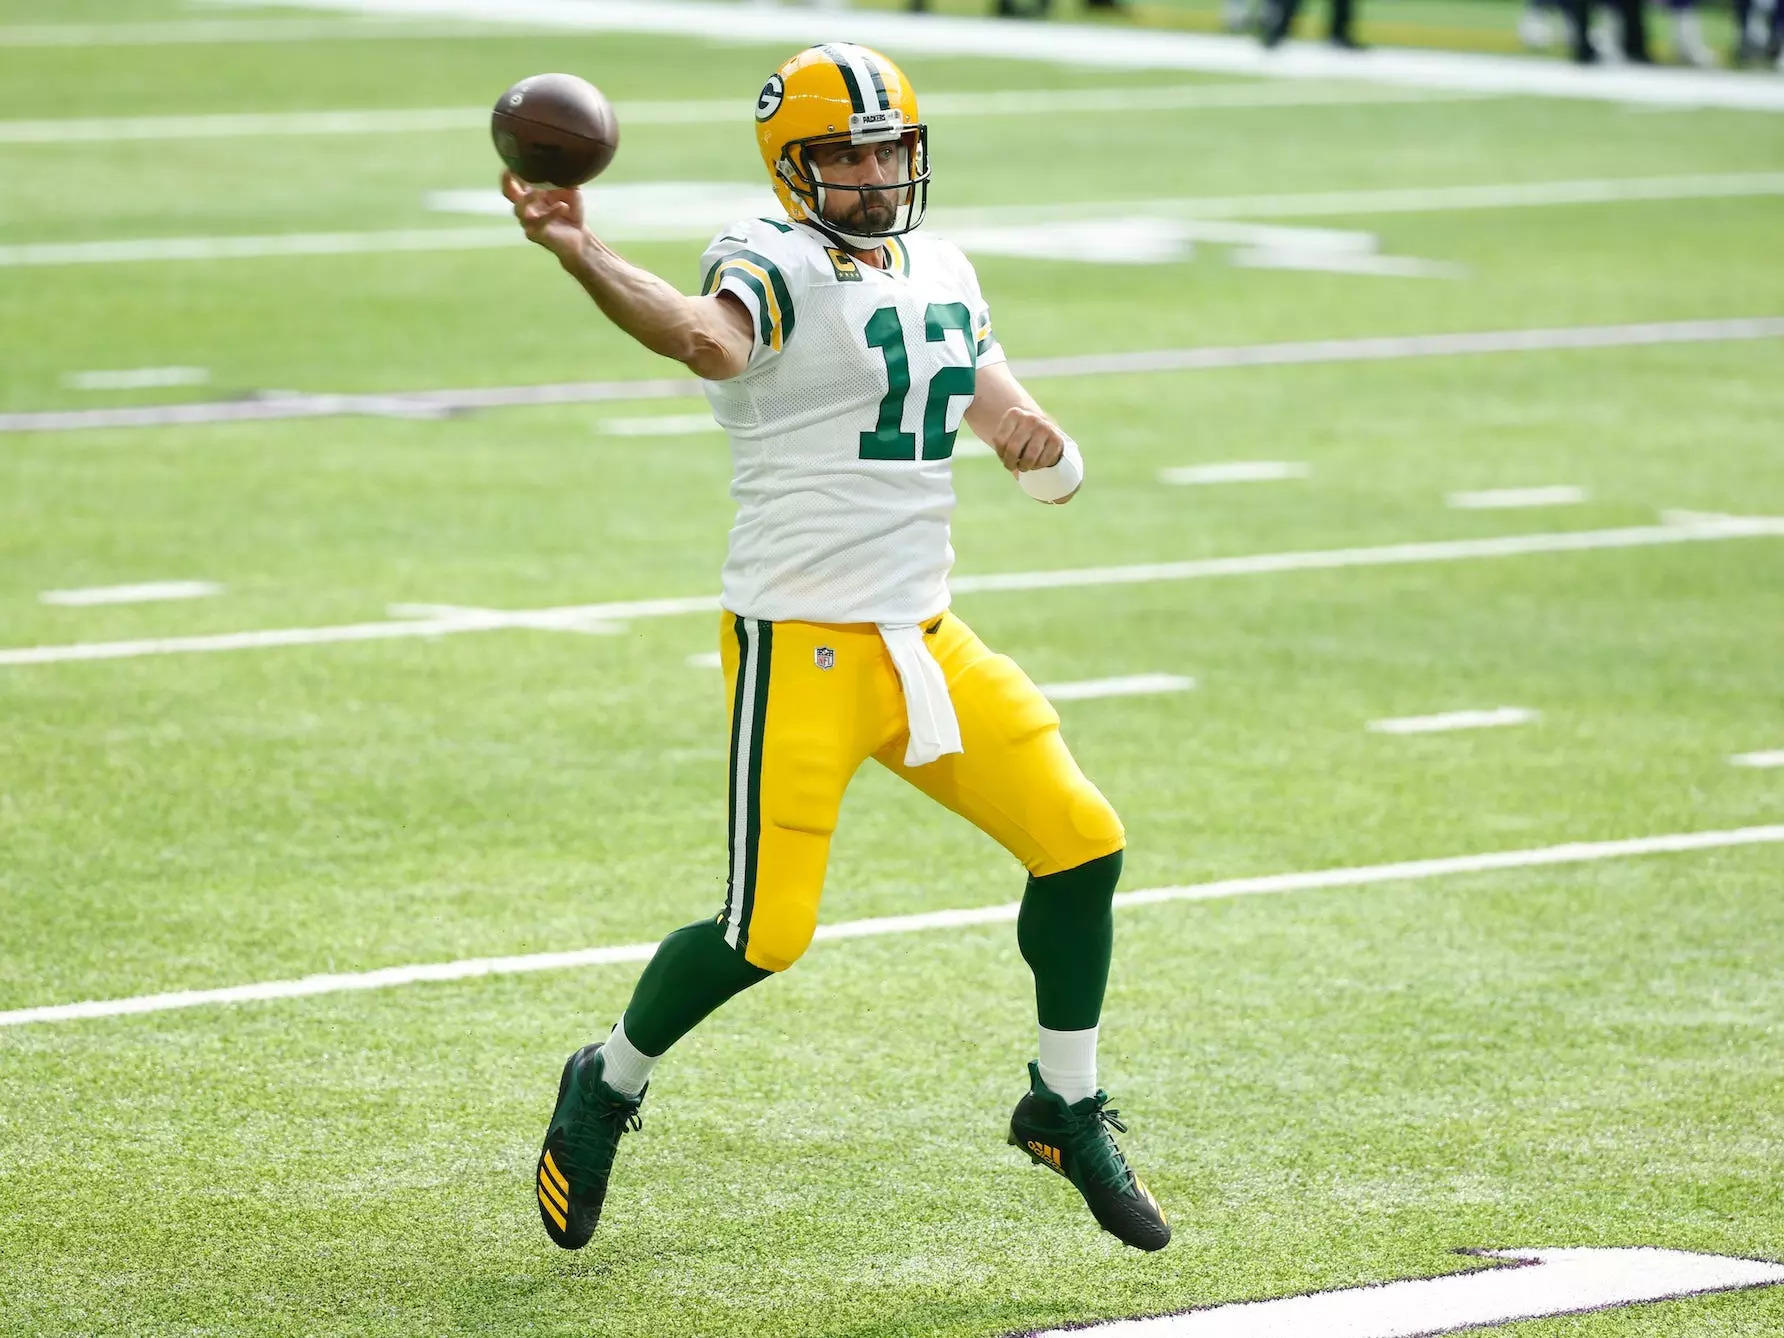 Aaron Rodgers makes a throw while jumping in the air.